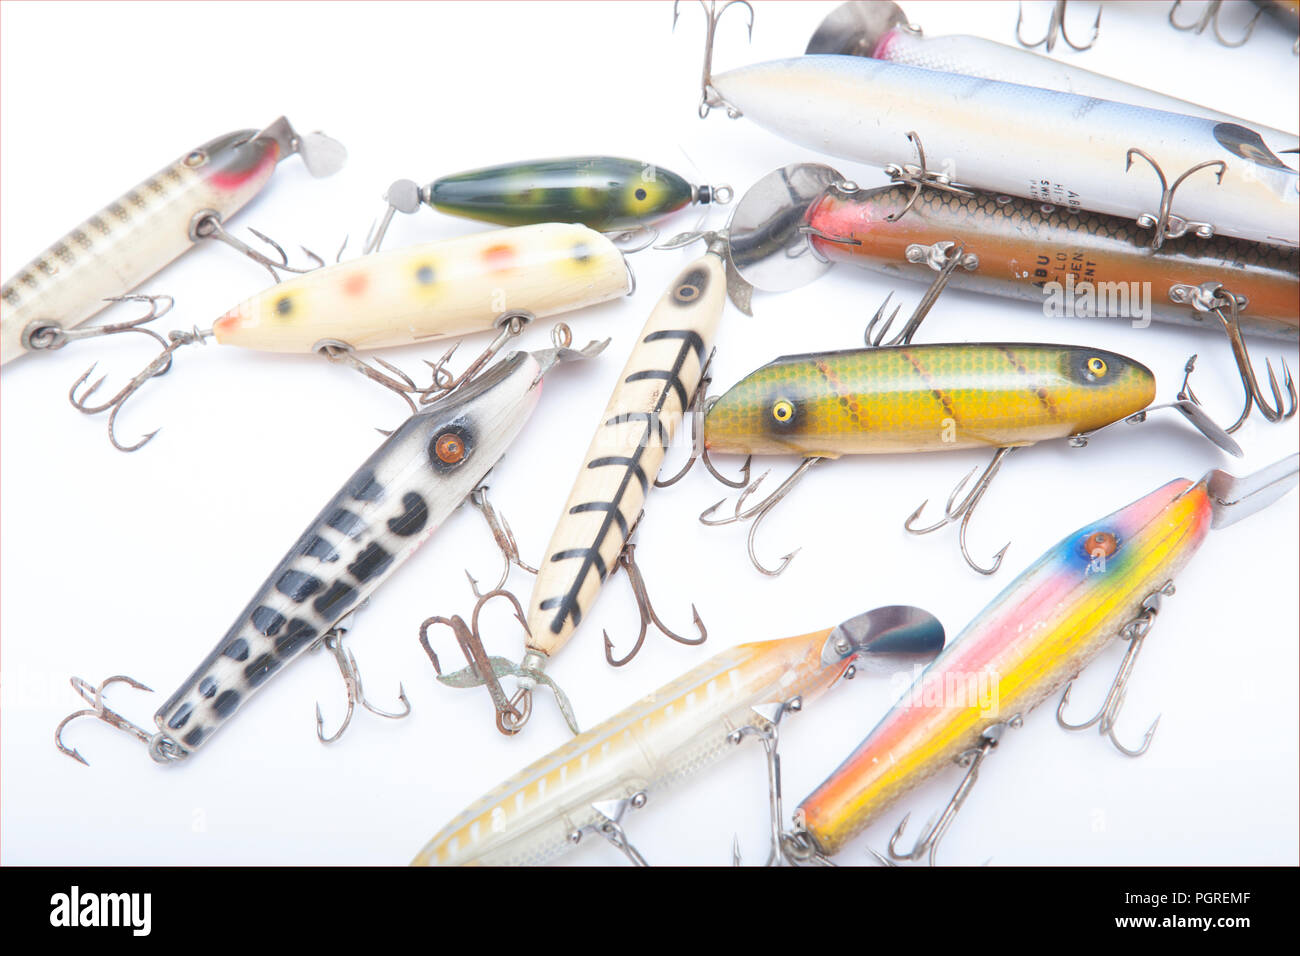 A selection of old fishing lures, or plugs, including makers such as Shakespeare and Abu. and From a collection of vintage and modern fishing tackle.  Stock Photo